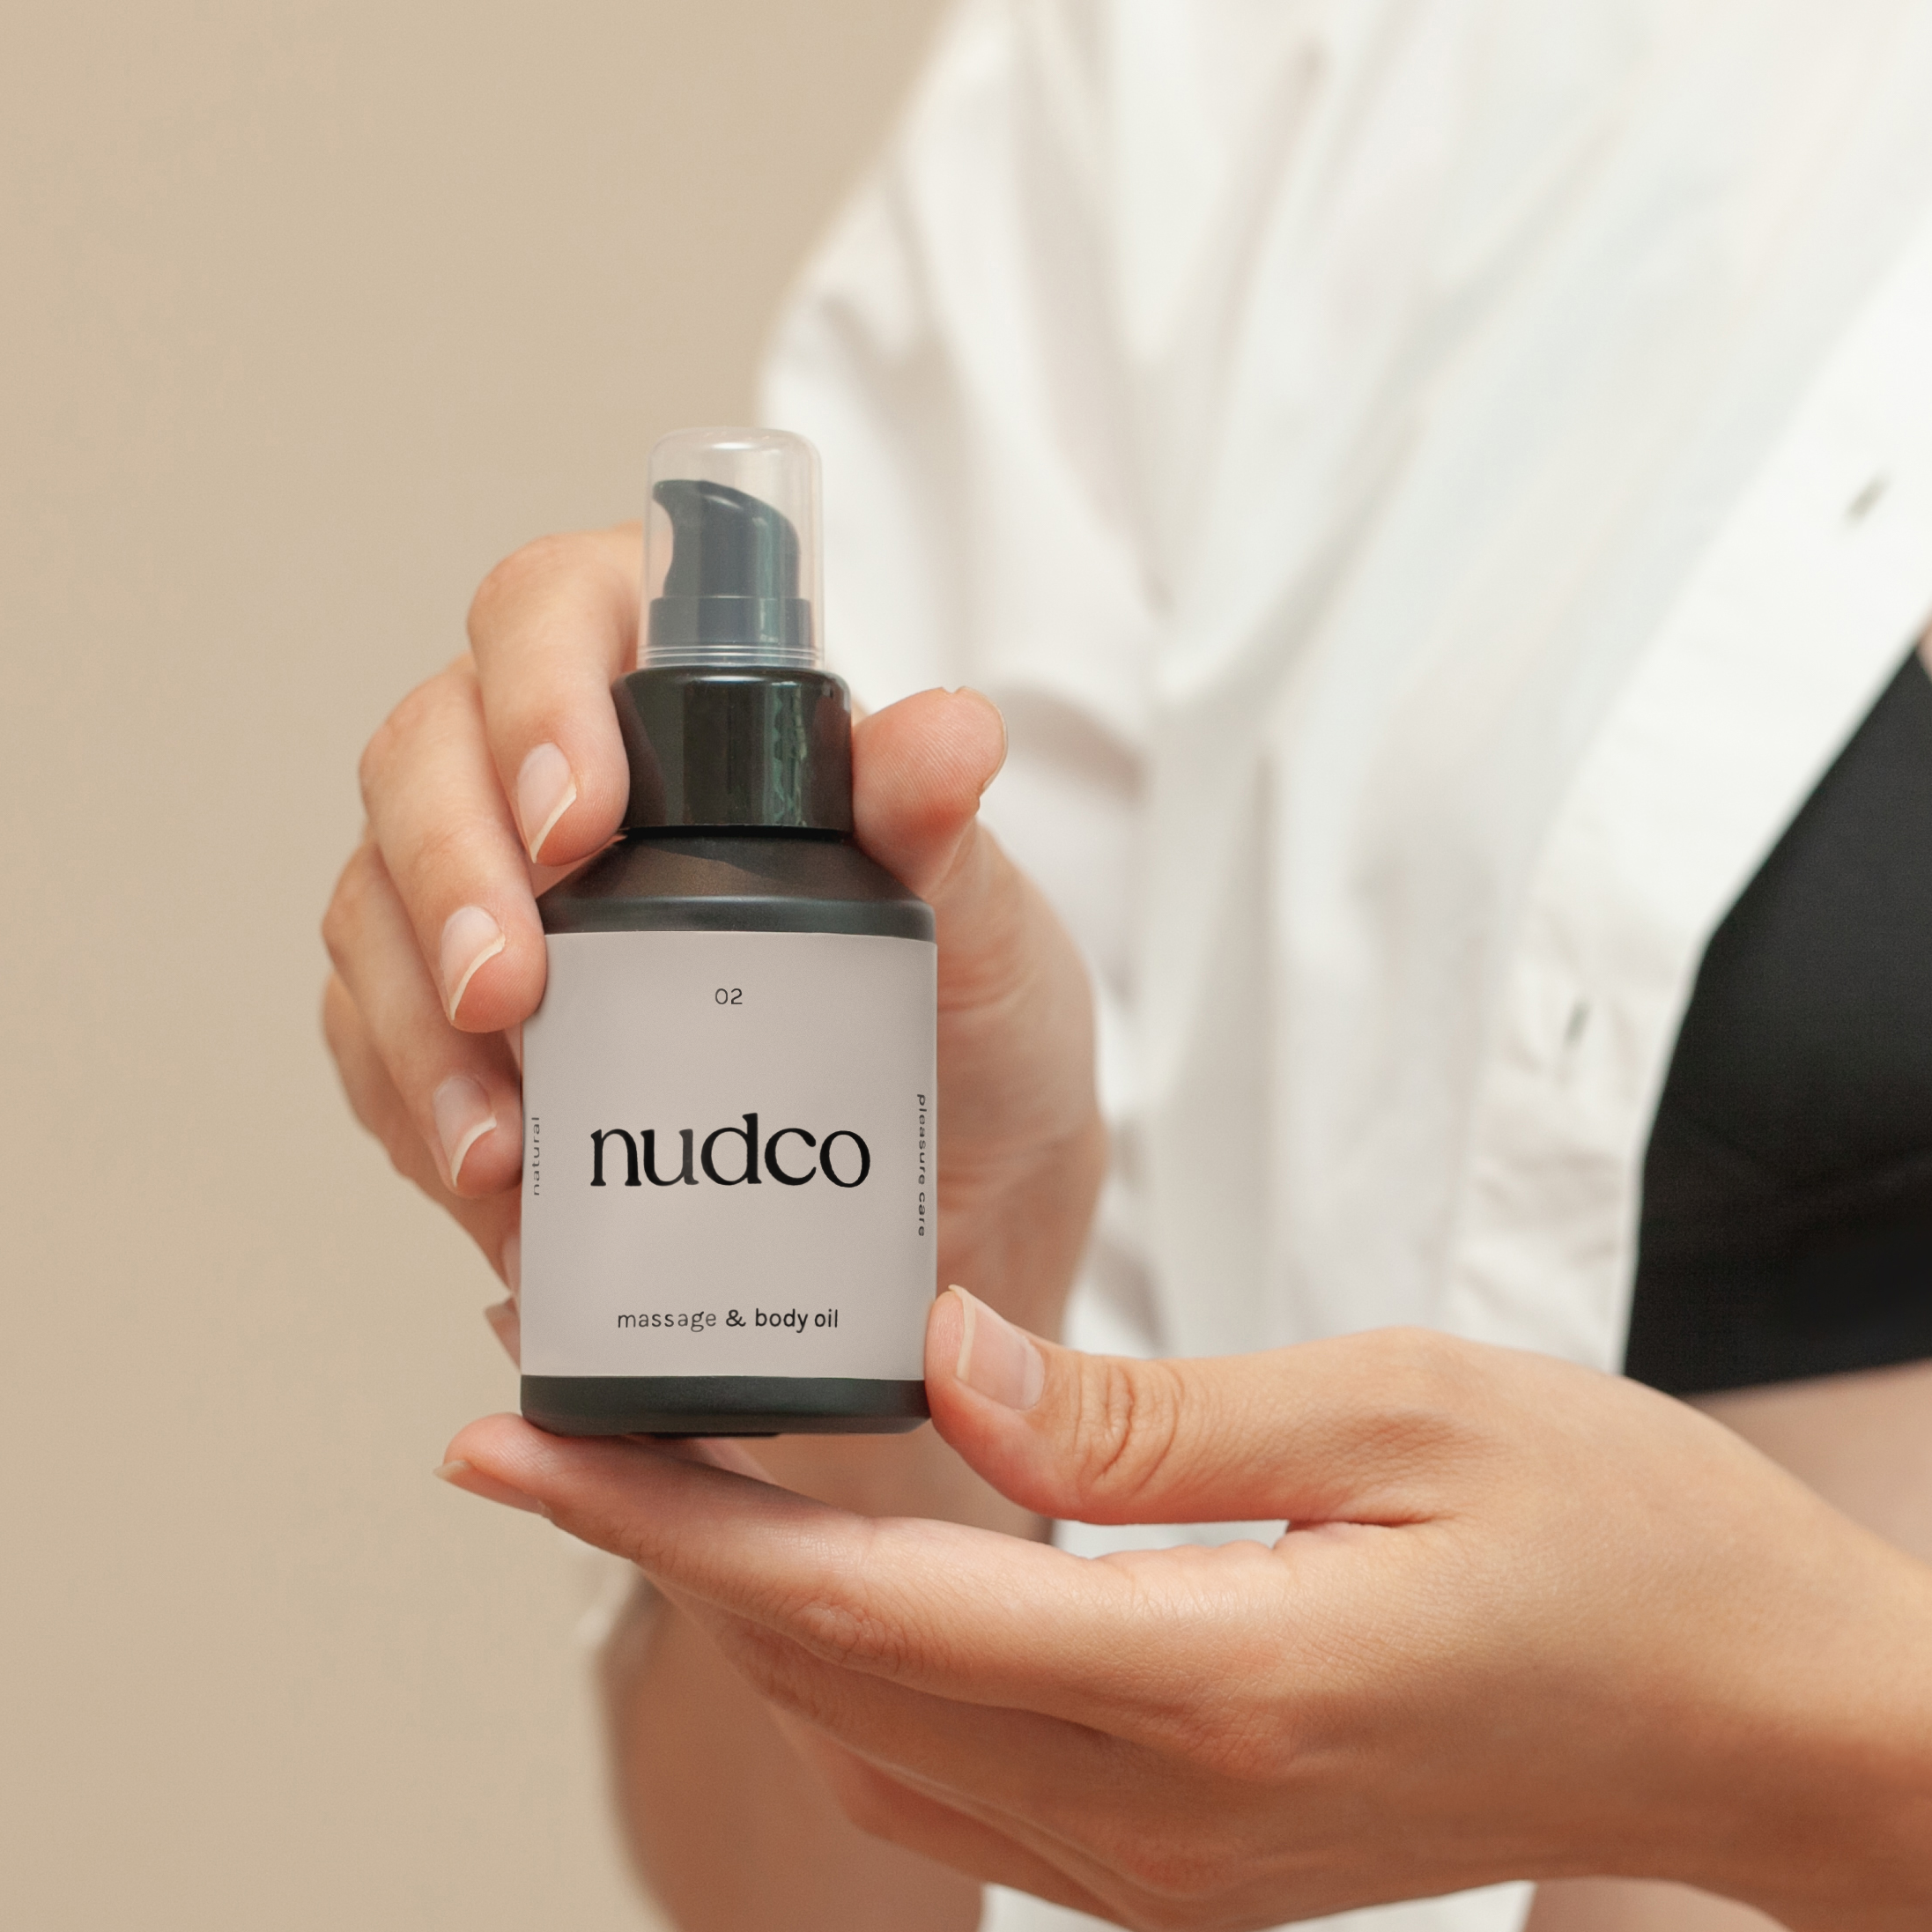 nudco massage and body oil